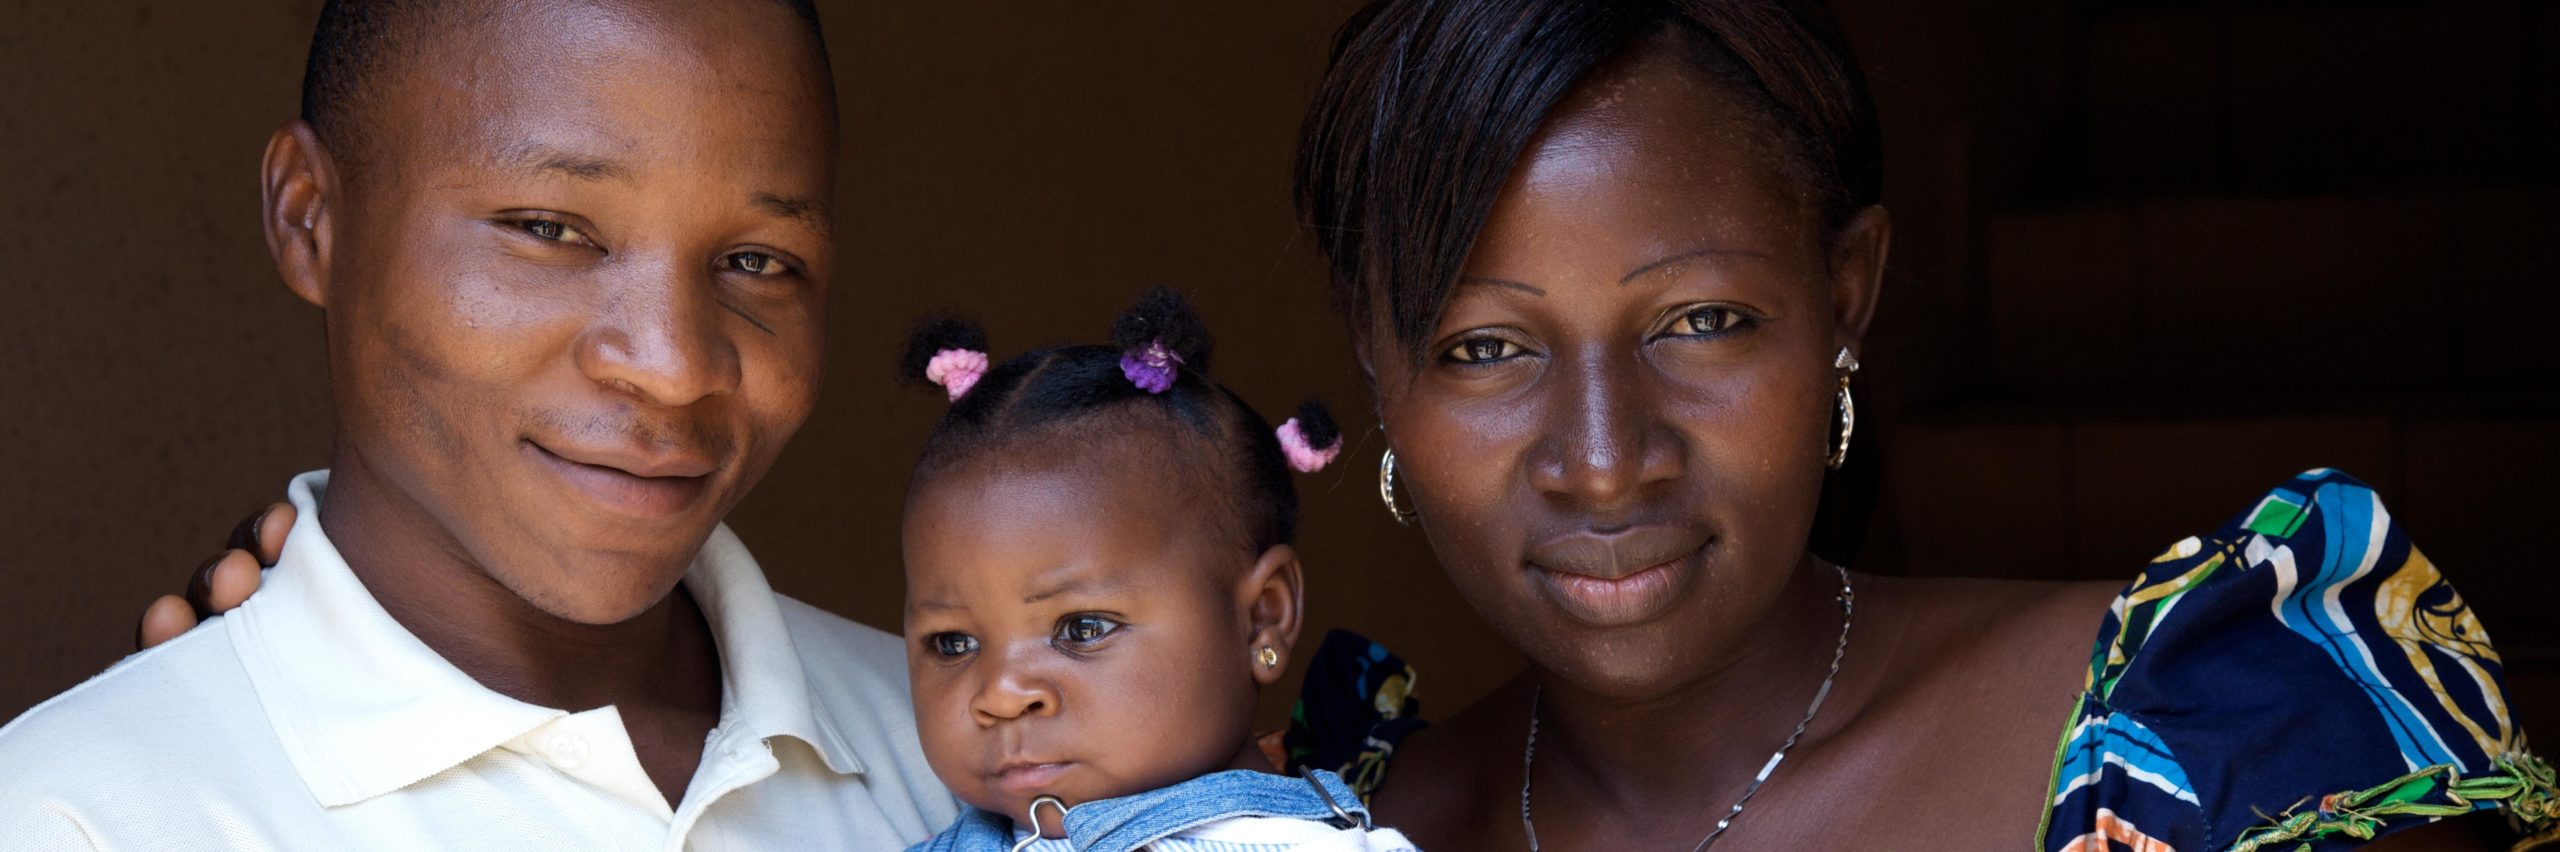 A PEPFAR Supported Family In Nigeria